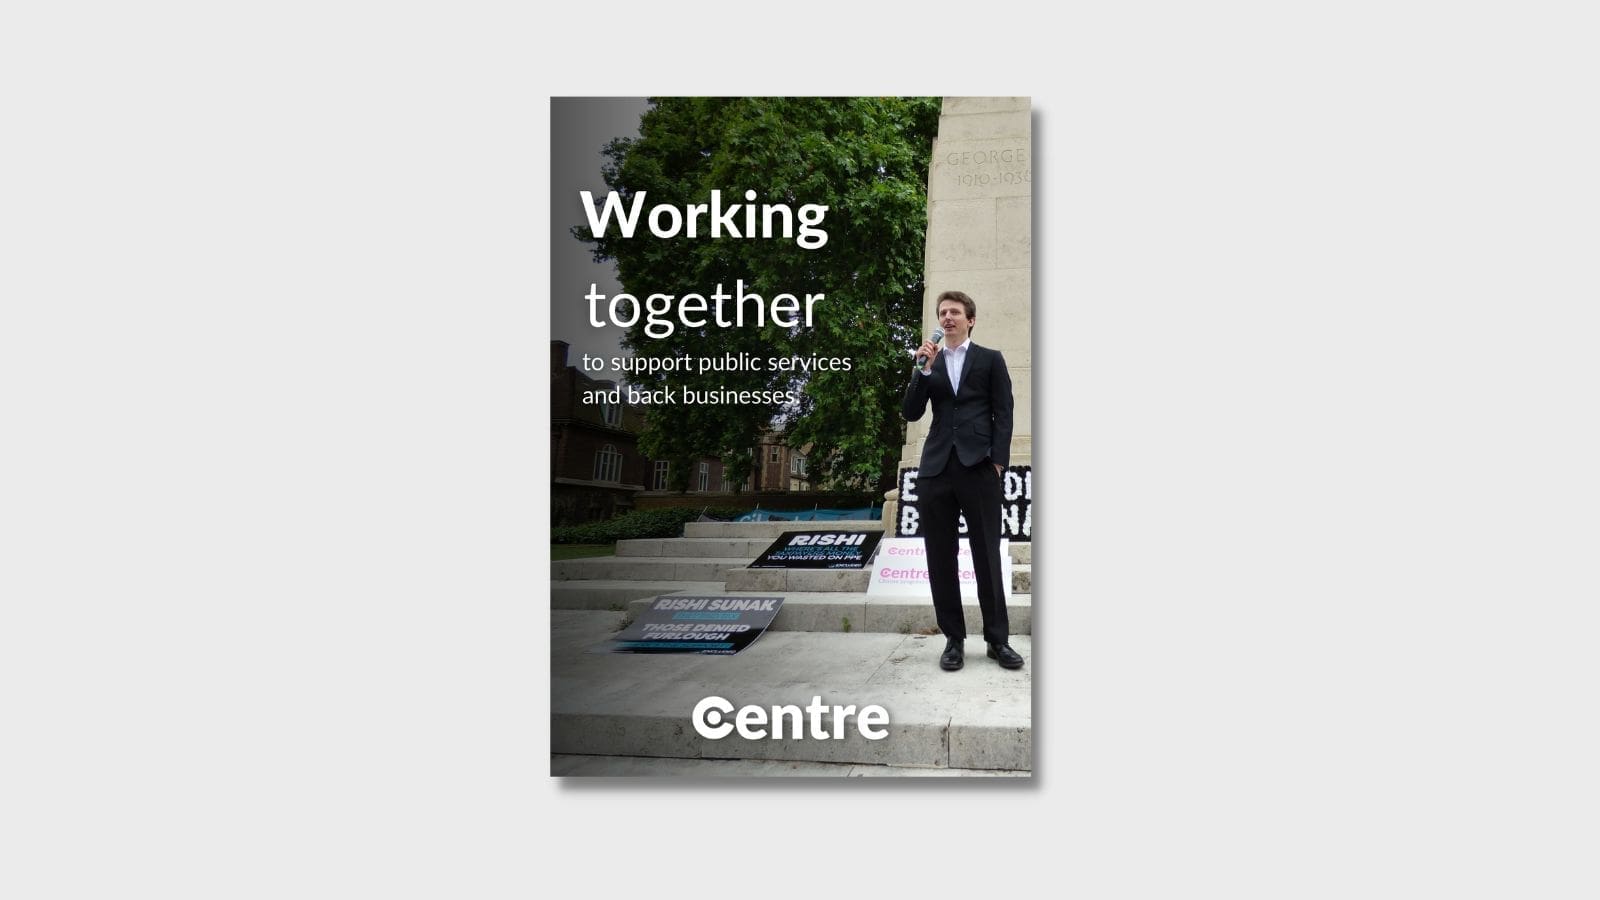 The words "Working Together to support public services and back businesses". Next to it is a person holding a microphone speaking. Below this is a white Centre logo.